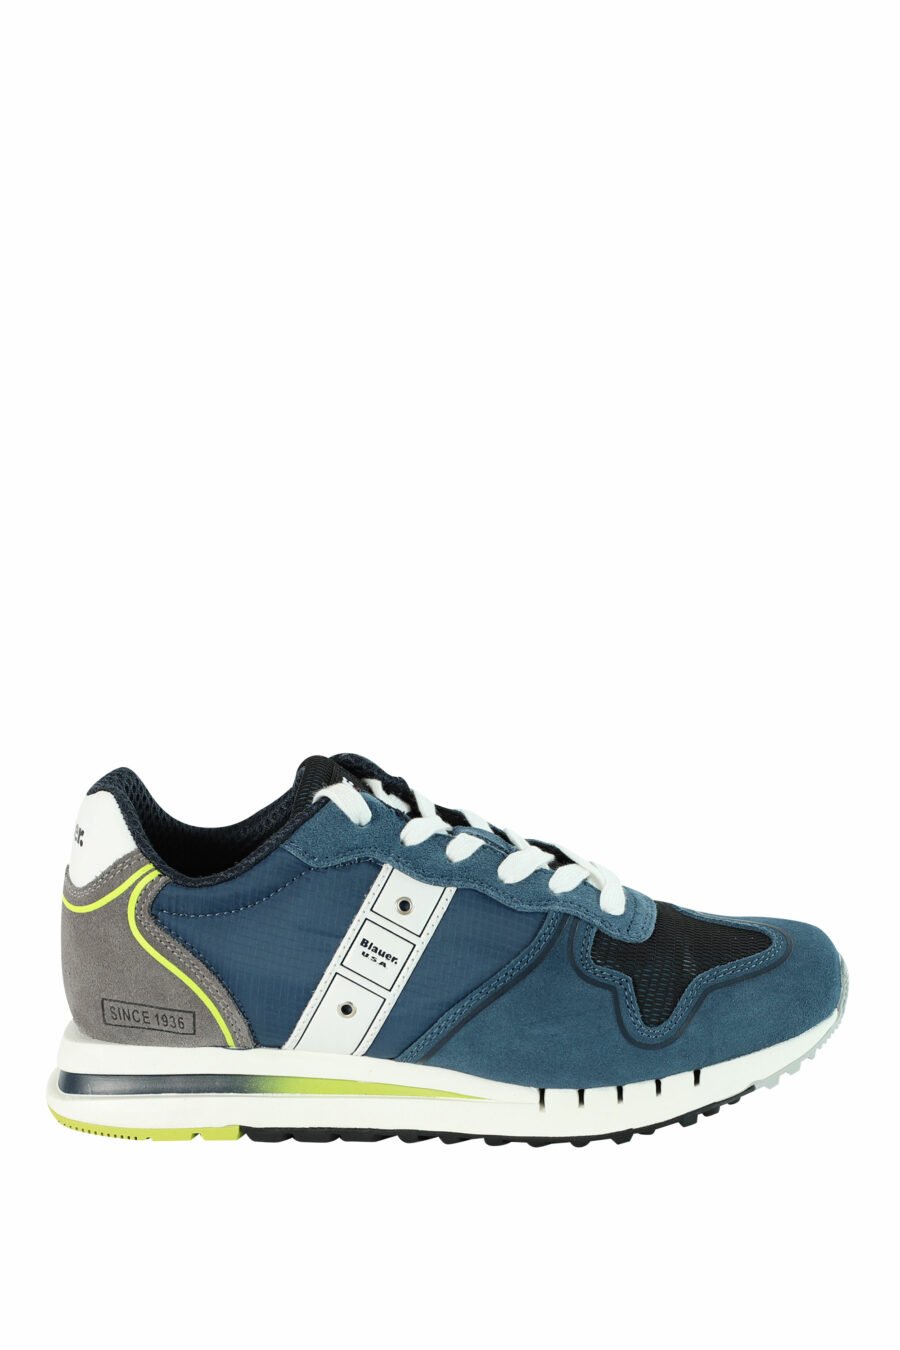 Trainers "QUARTZ" blue with grey and yellow details - 8058156499119